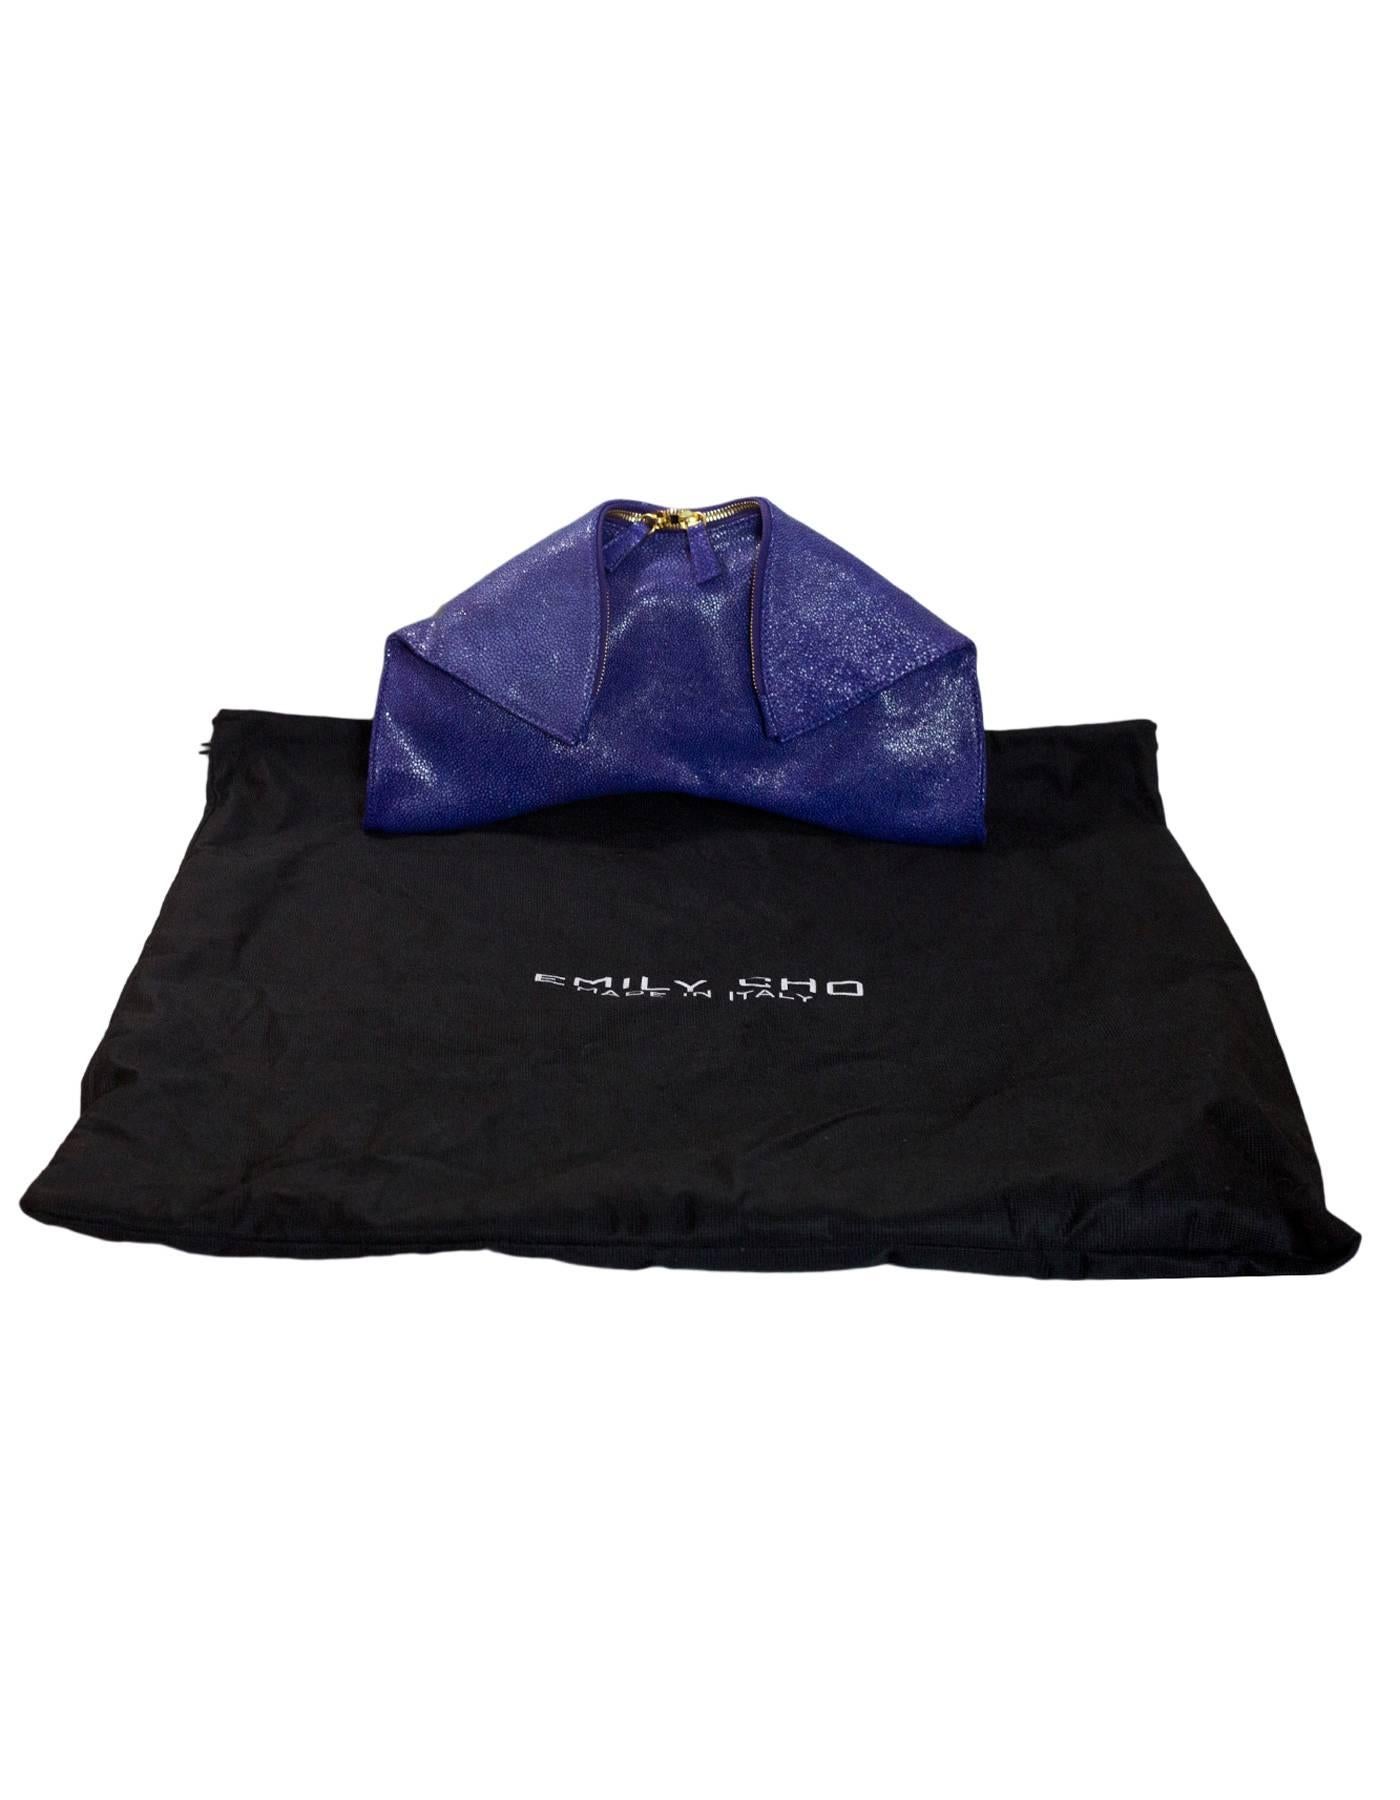 Emily Cho Purple Embossed Stingray Folded Clutch with Dust Bag rt. $595 6